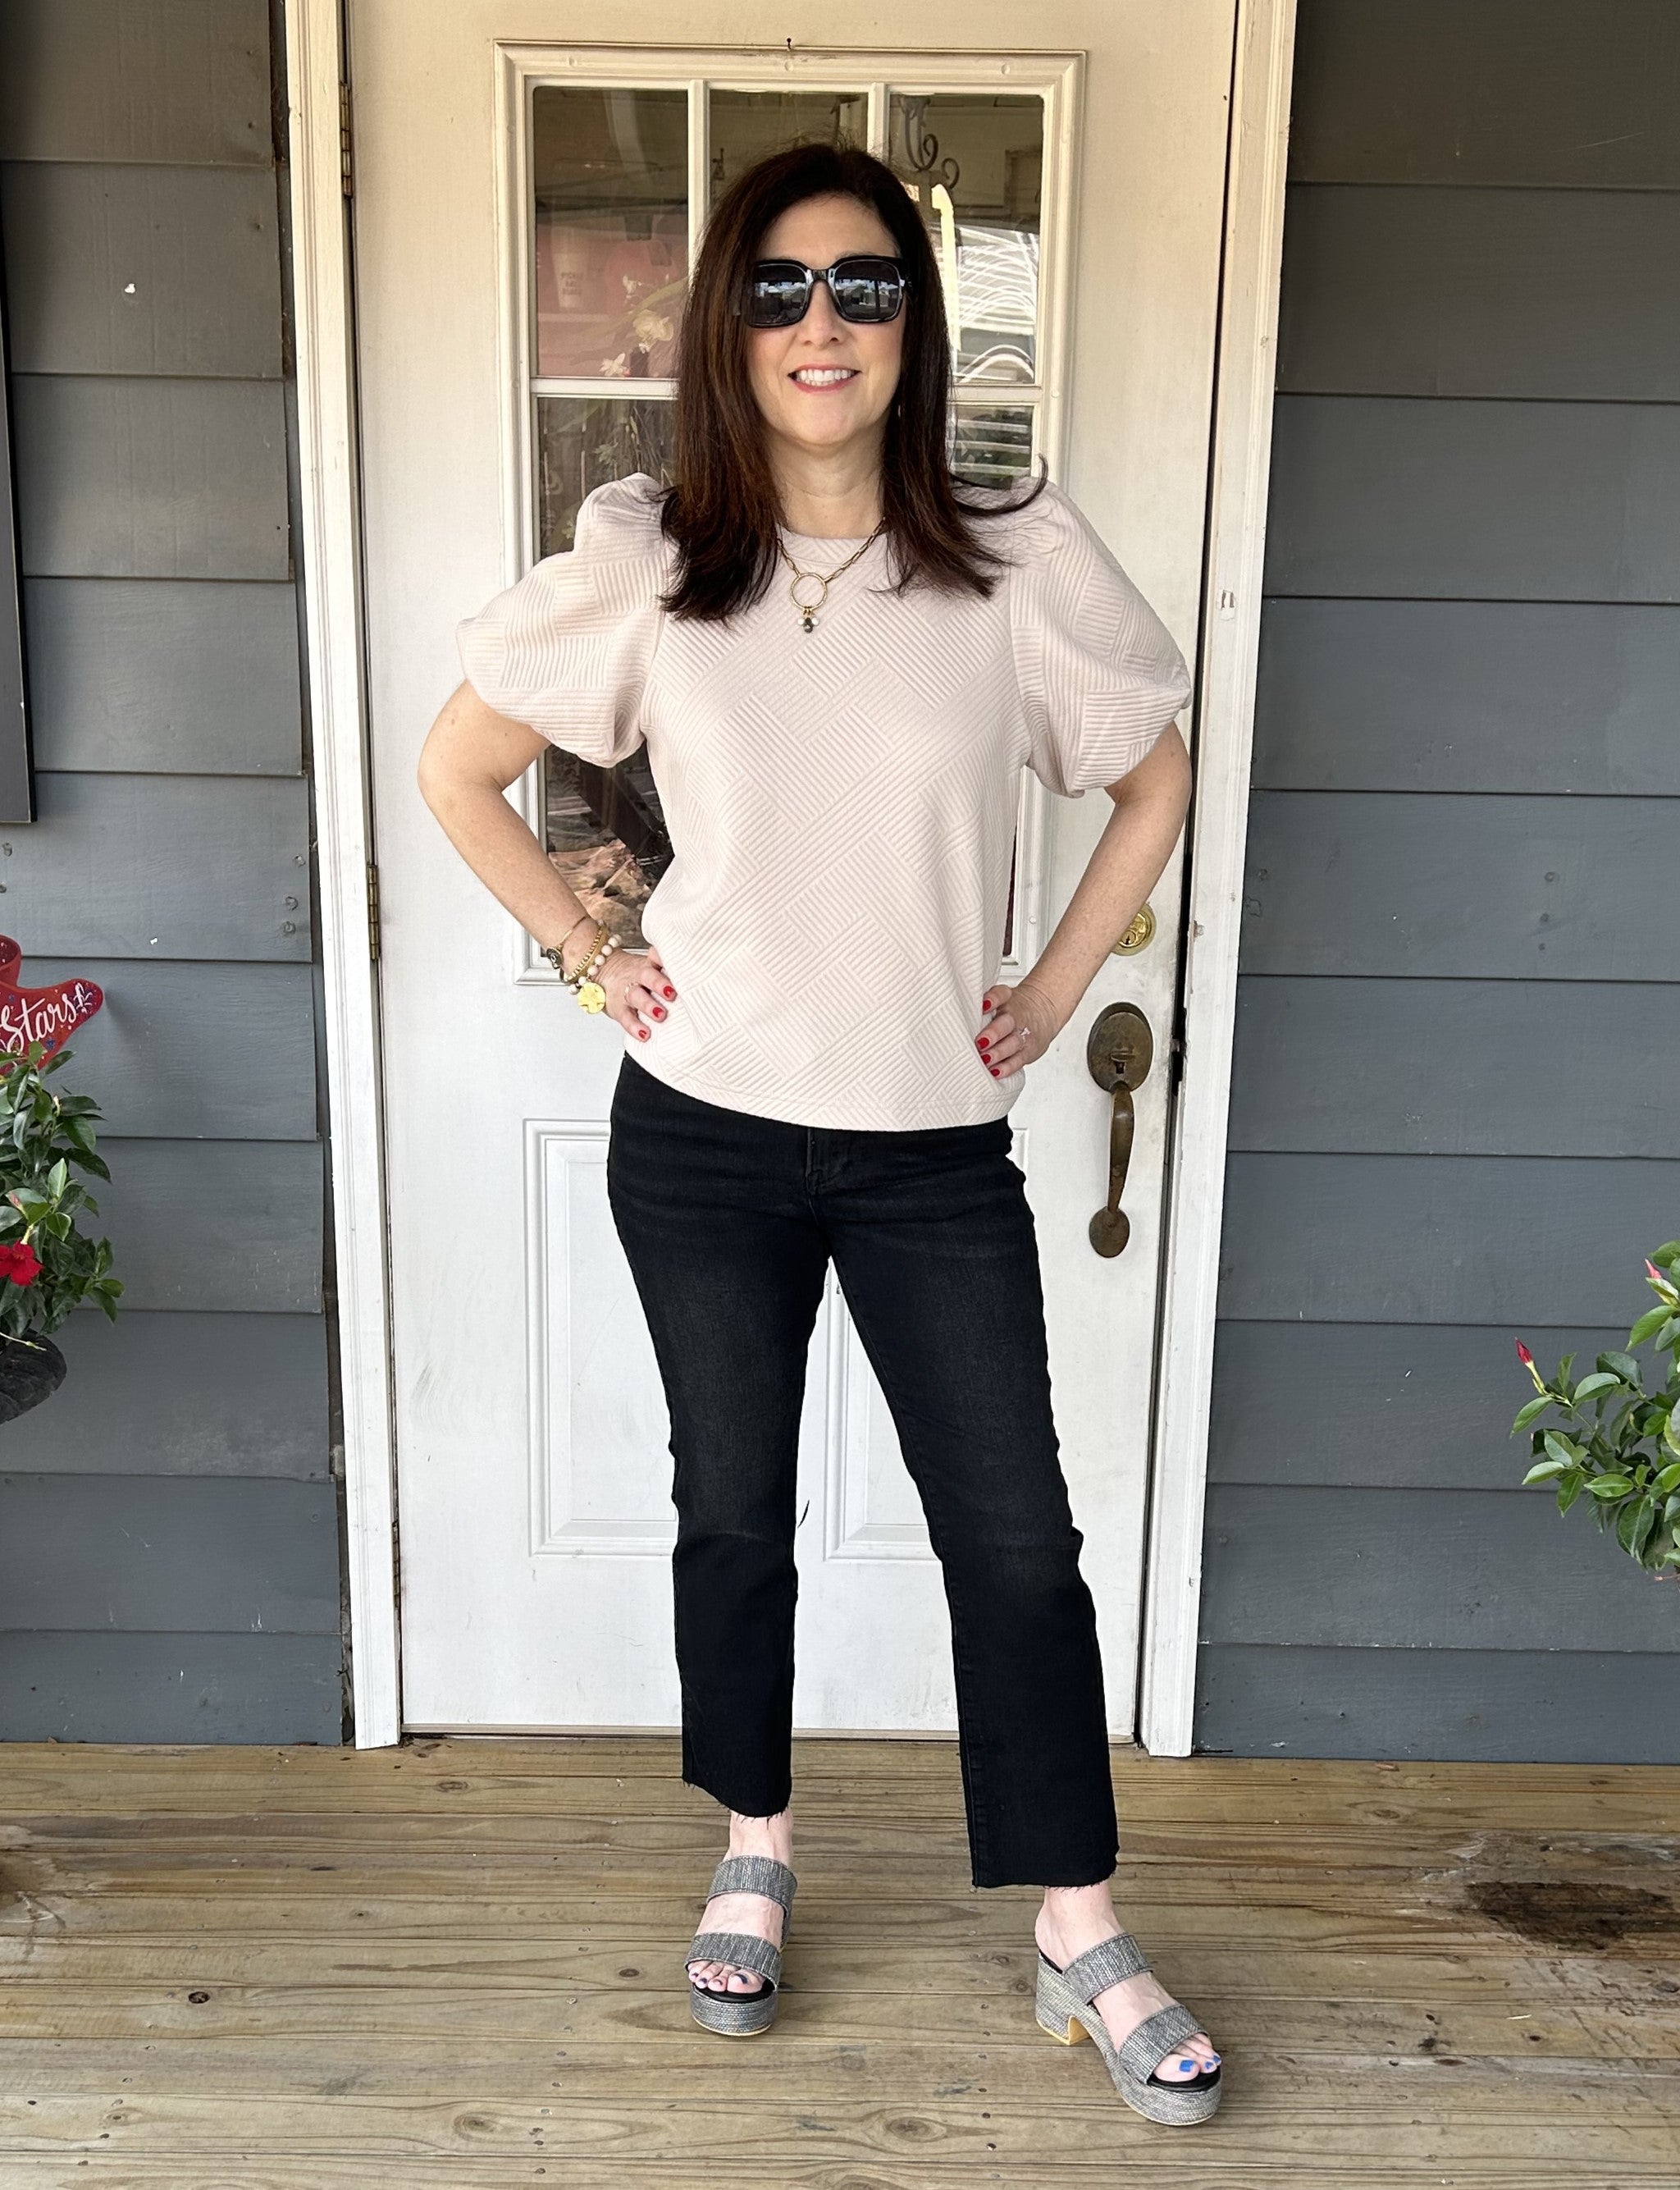 These Mid-Rise Ankle Boot Cut Jeans are the closet staple you need! Their mid-rise fit and black hue is timeless and flattering, and the ankle boot cut creates a sophisticated, polished look.  Material: 98% Cotton / 2% Spandex   Care Instructions: Turn inside out, machine wash cold, tumble dry low